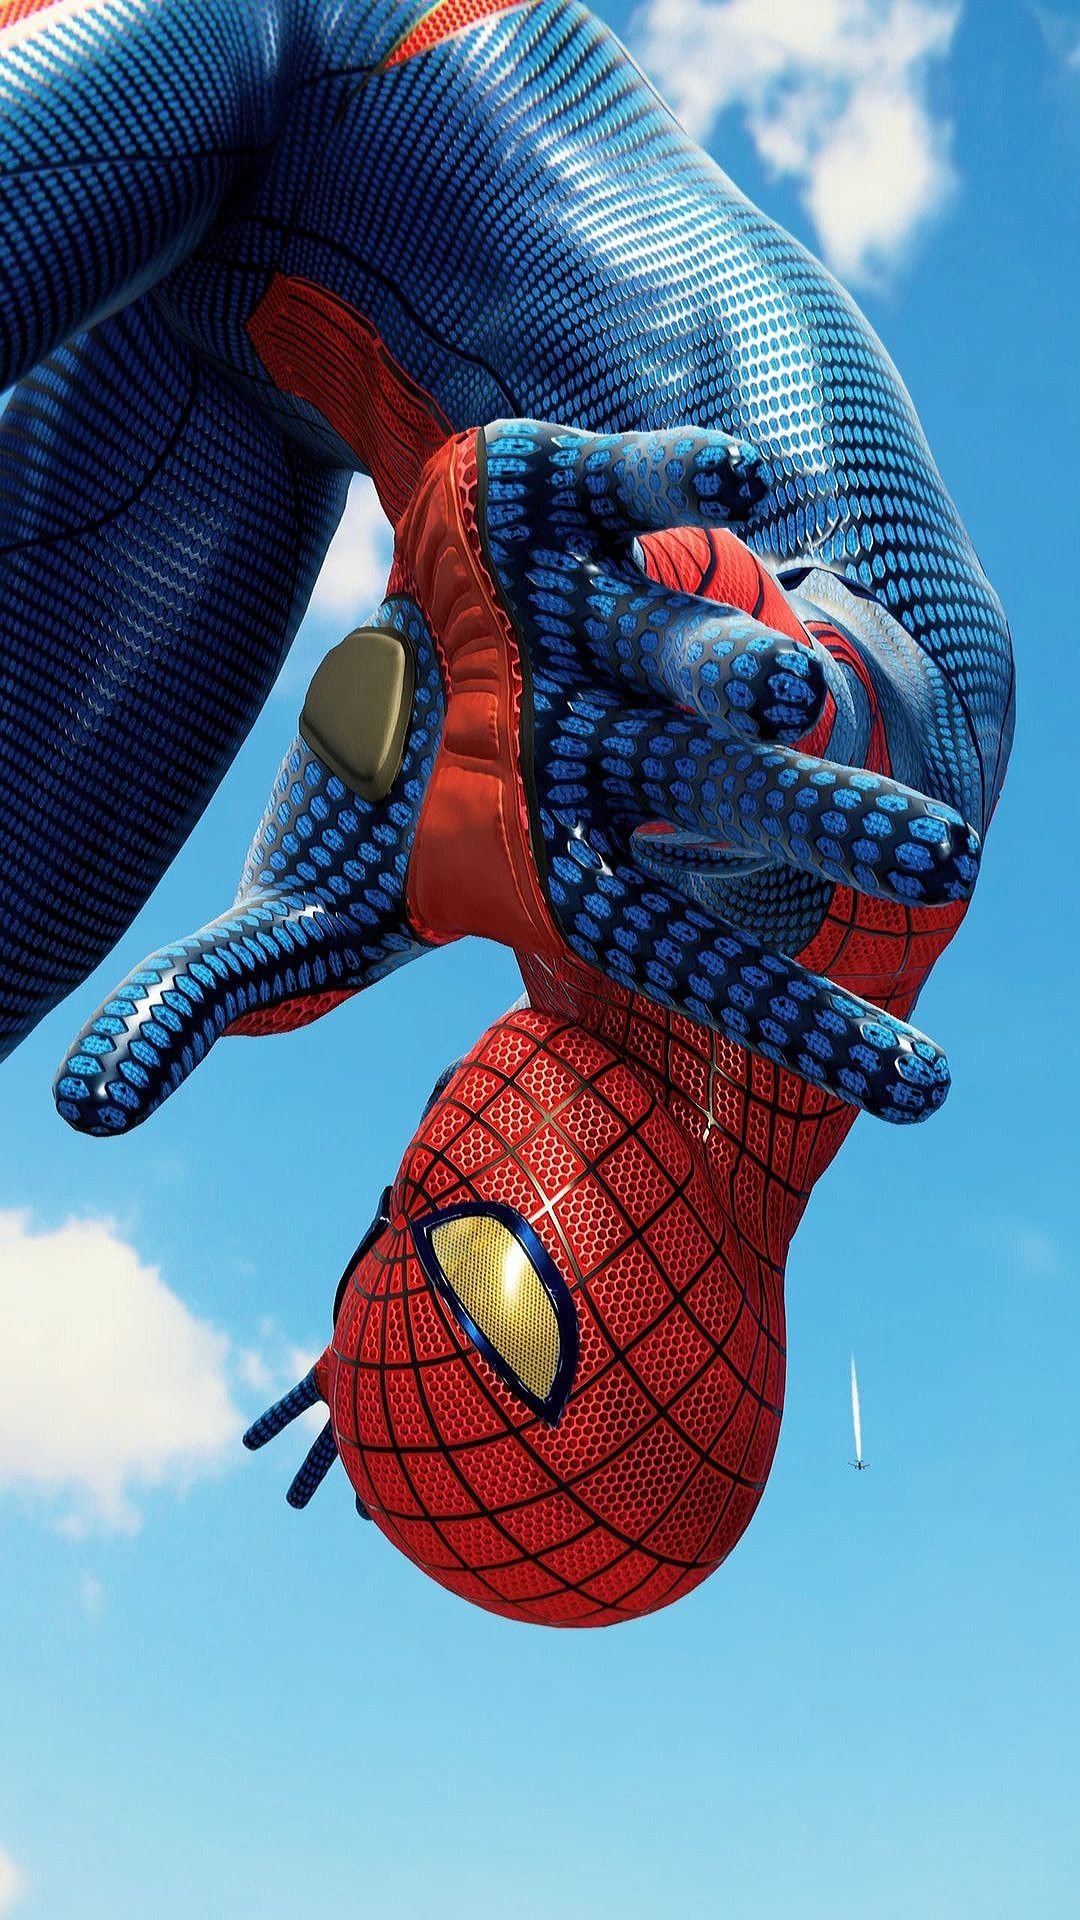 Spiderman Wallpaper HD For Android